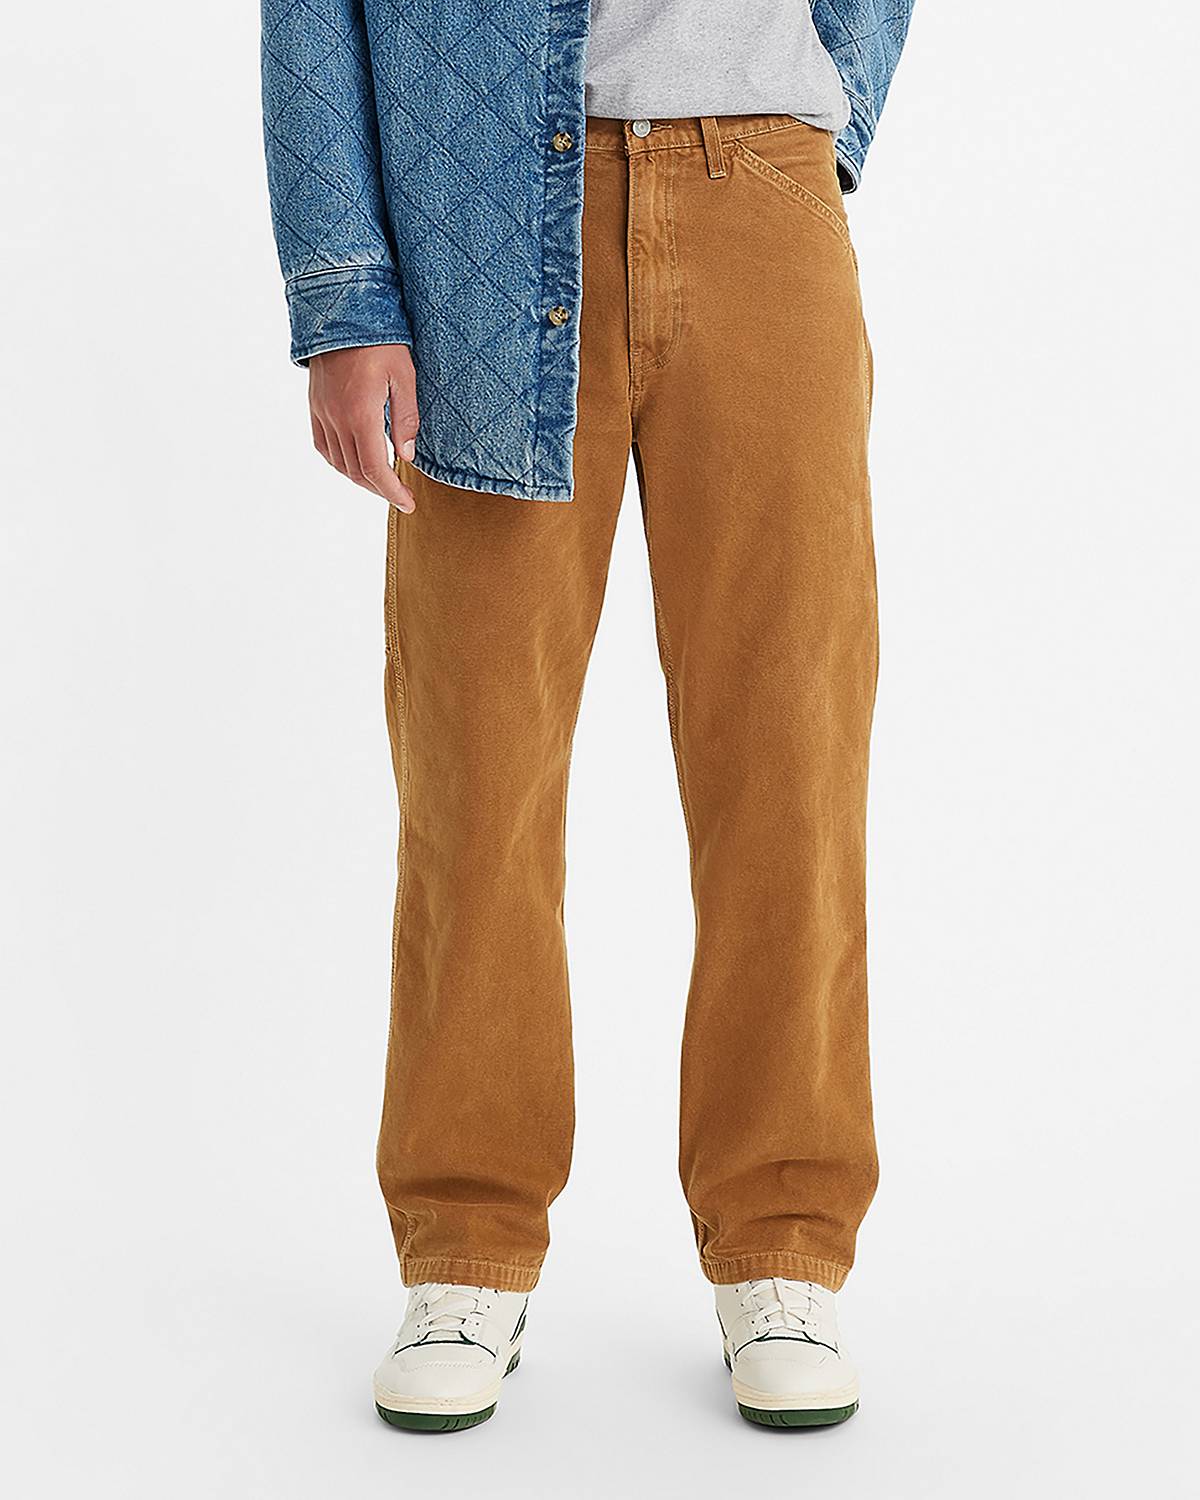 Model wearing tan relaxed fit pants.